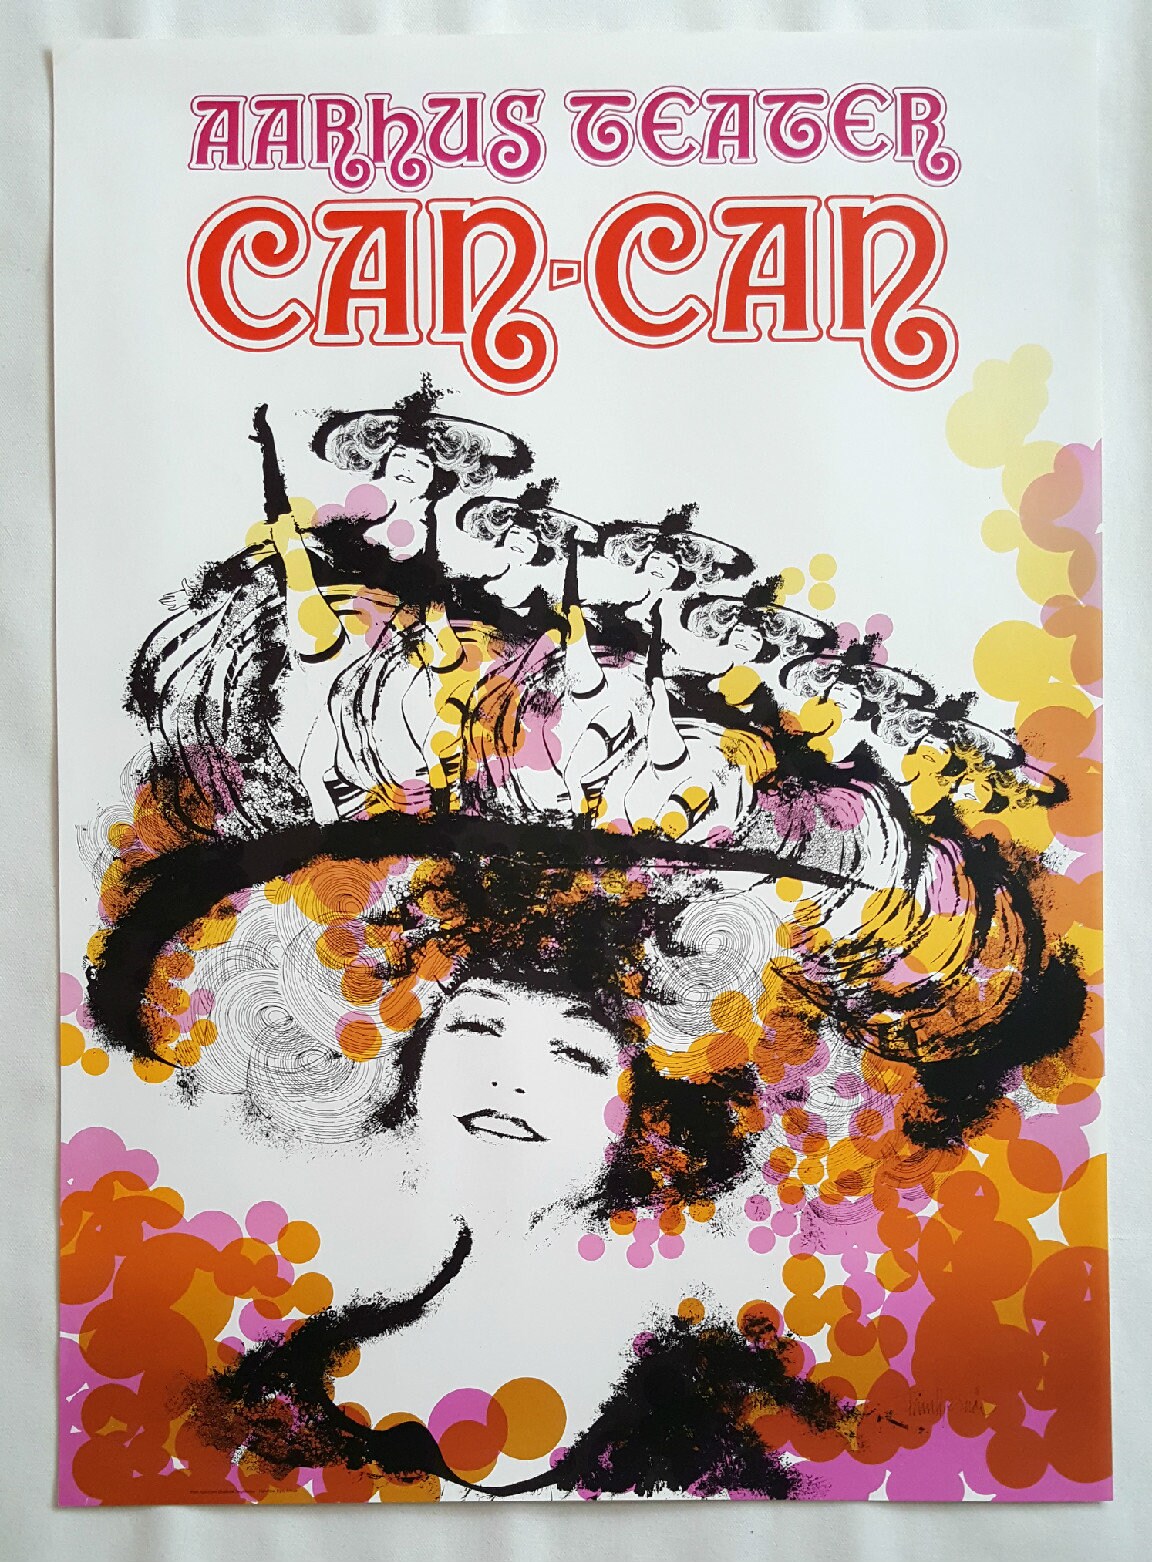 1975 Can-Can Musical by Aarhus Teater - Original Vintage Poster